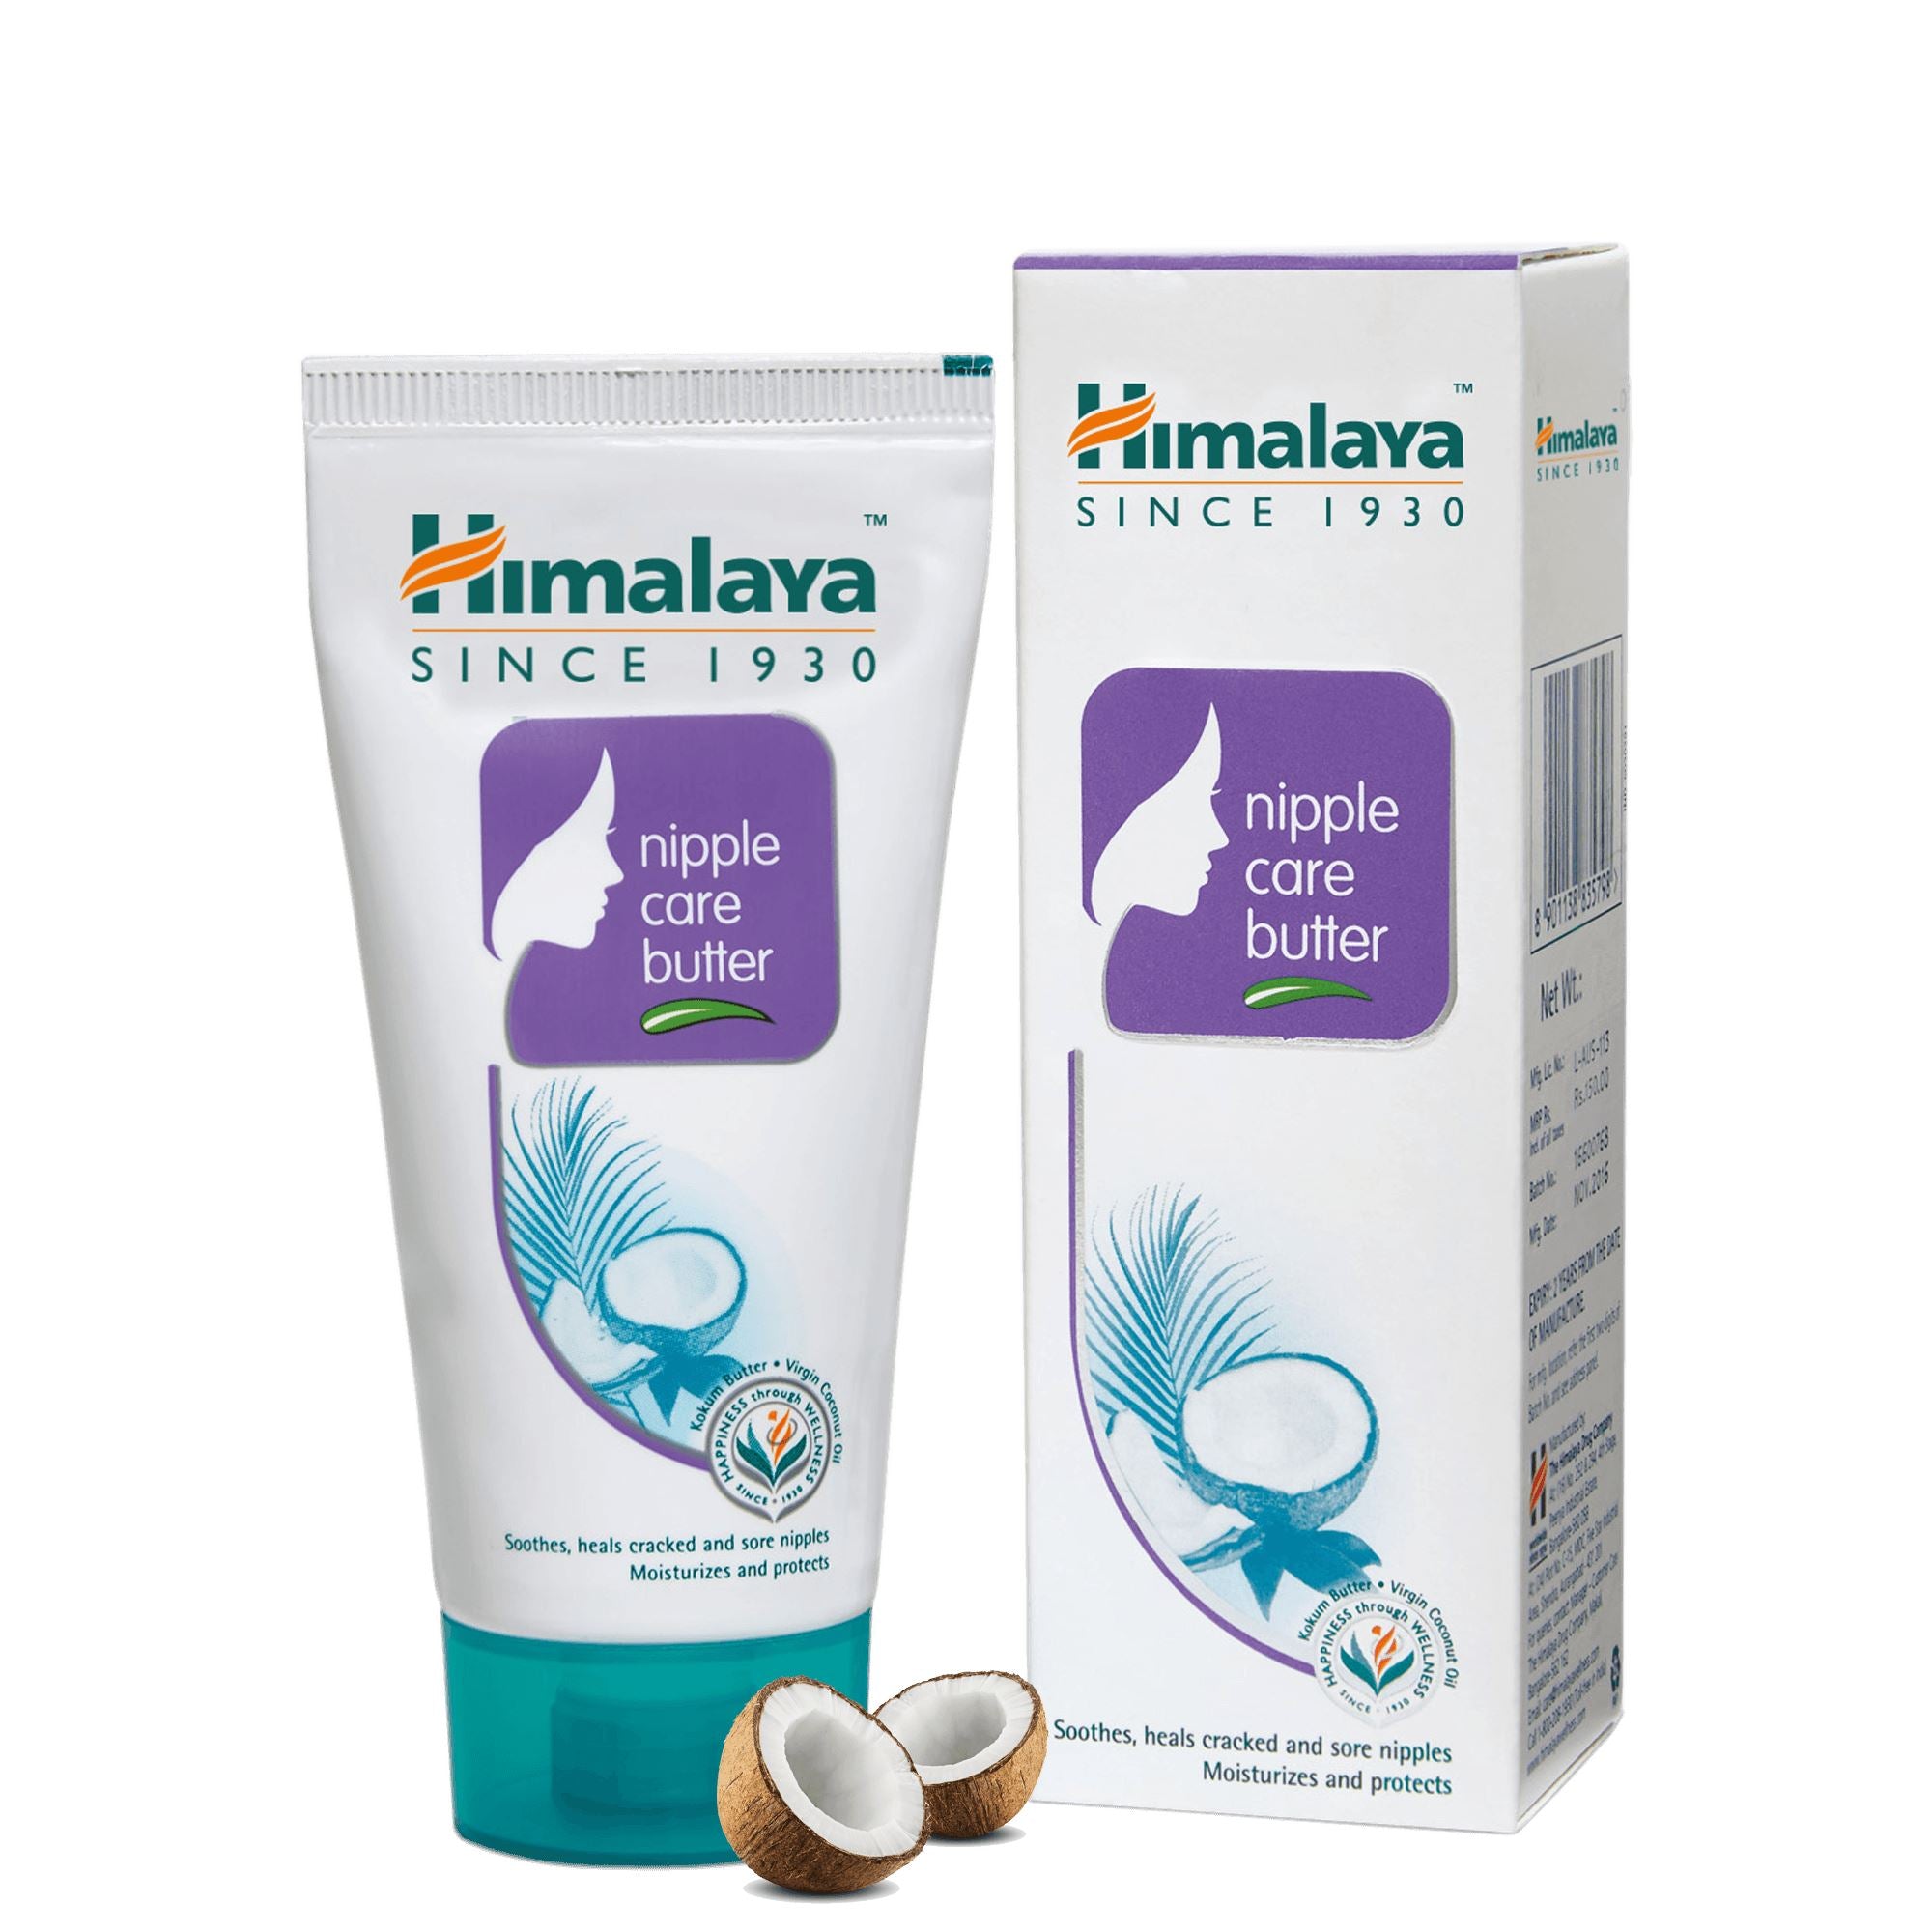 Himalaya Nipple care butter 20g- Soothe, heal, and protect dry, cracked, and sore nipples